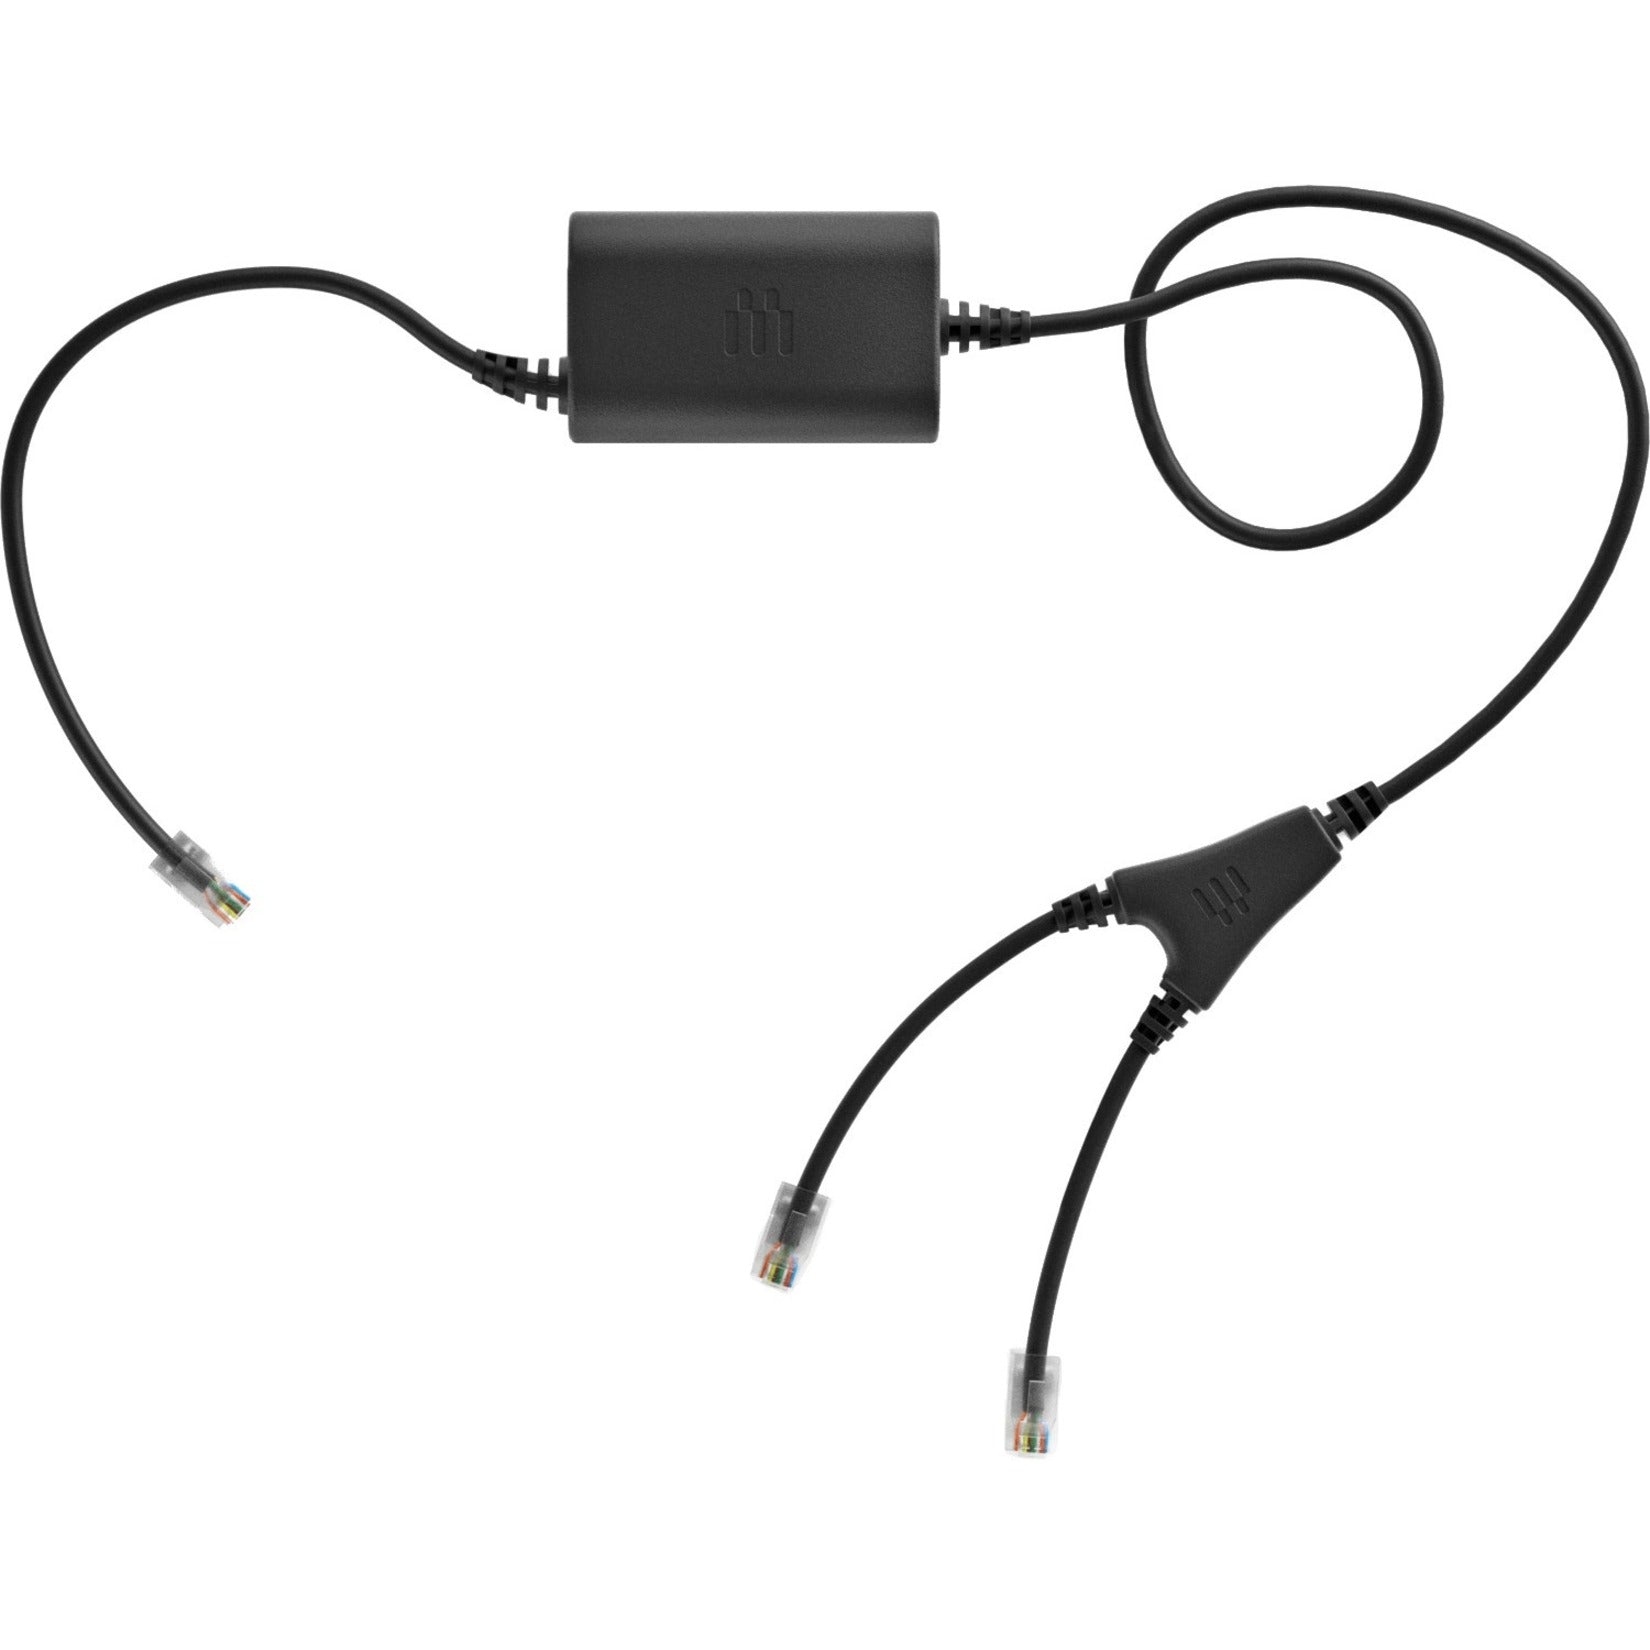 EPOS 1000741 Electronic Hook Switch Cable, Compatible with Epos Impact headset Series, Avaya Phones